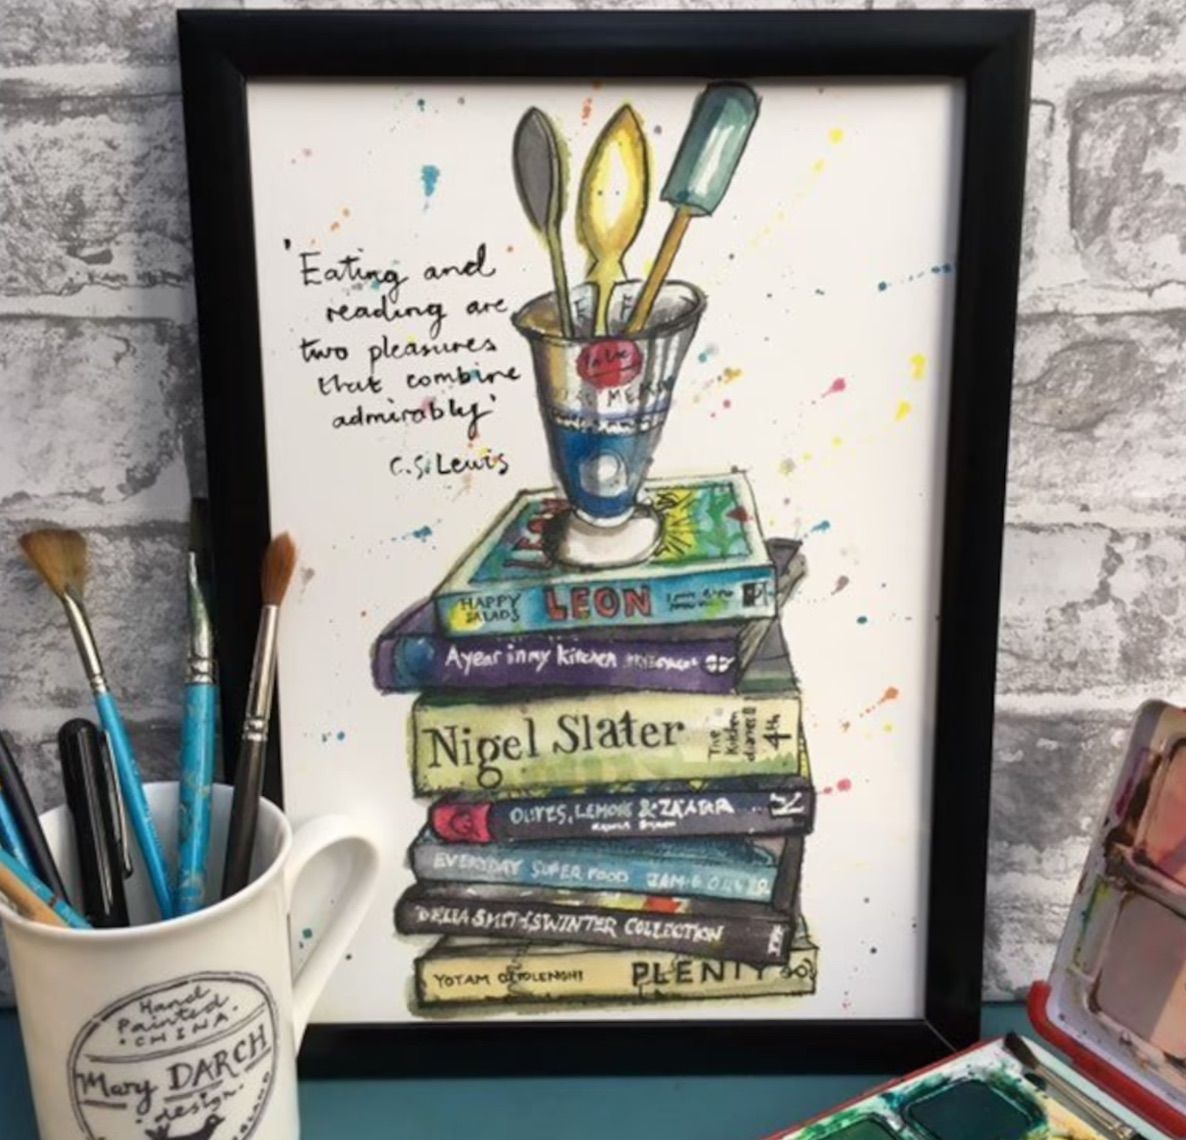 Image of a print that features a stack of cookbooks and a CS Lewis quote.